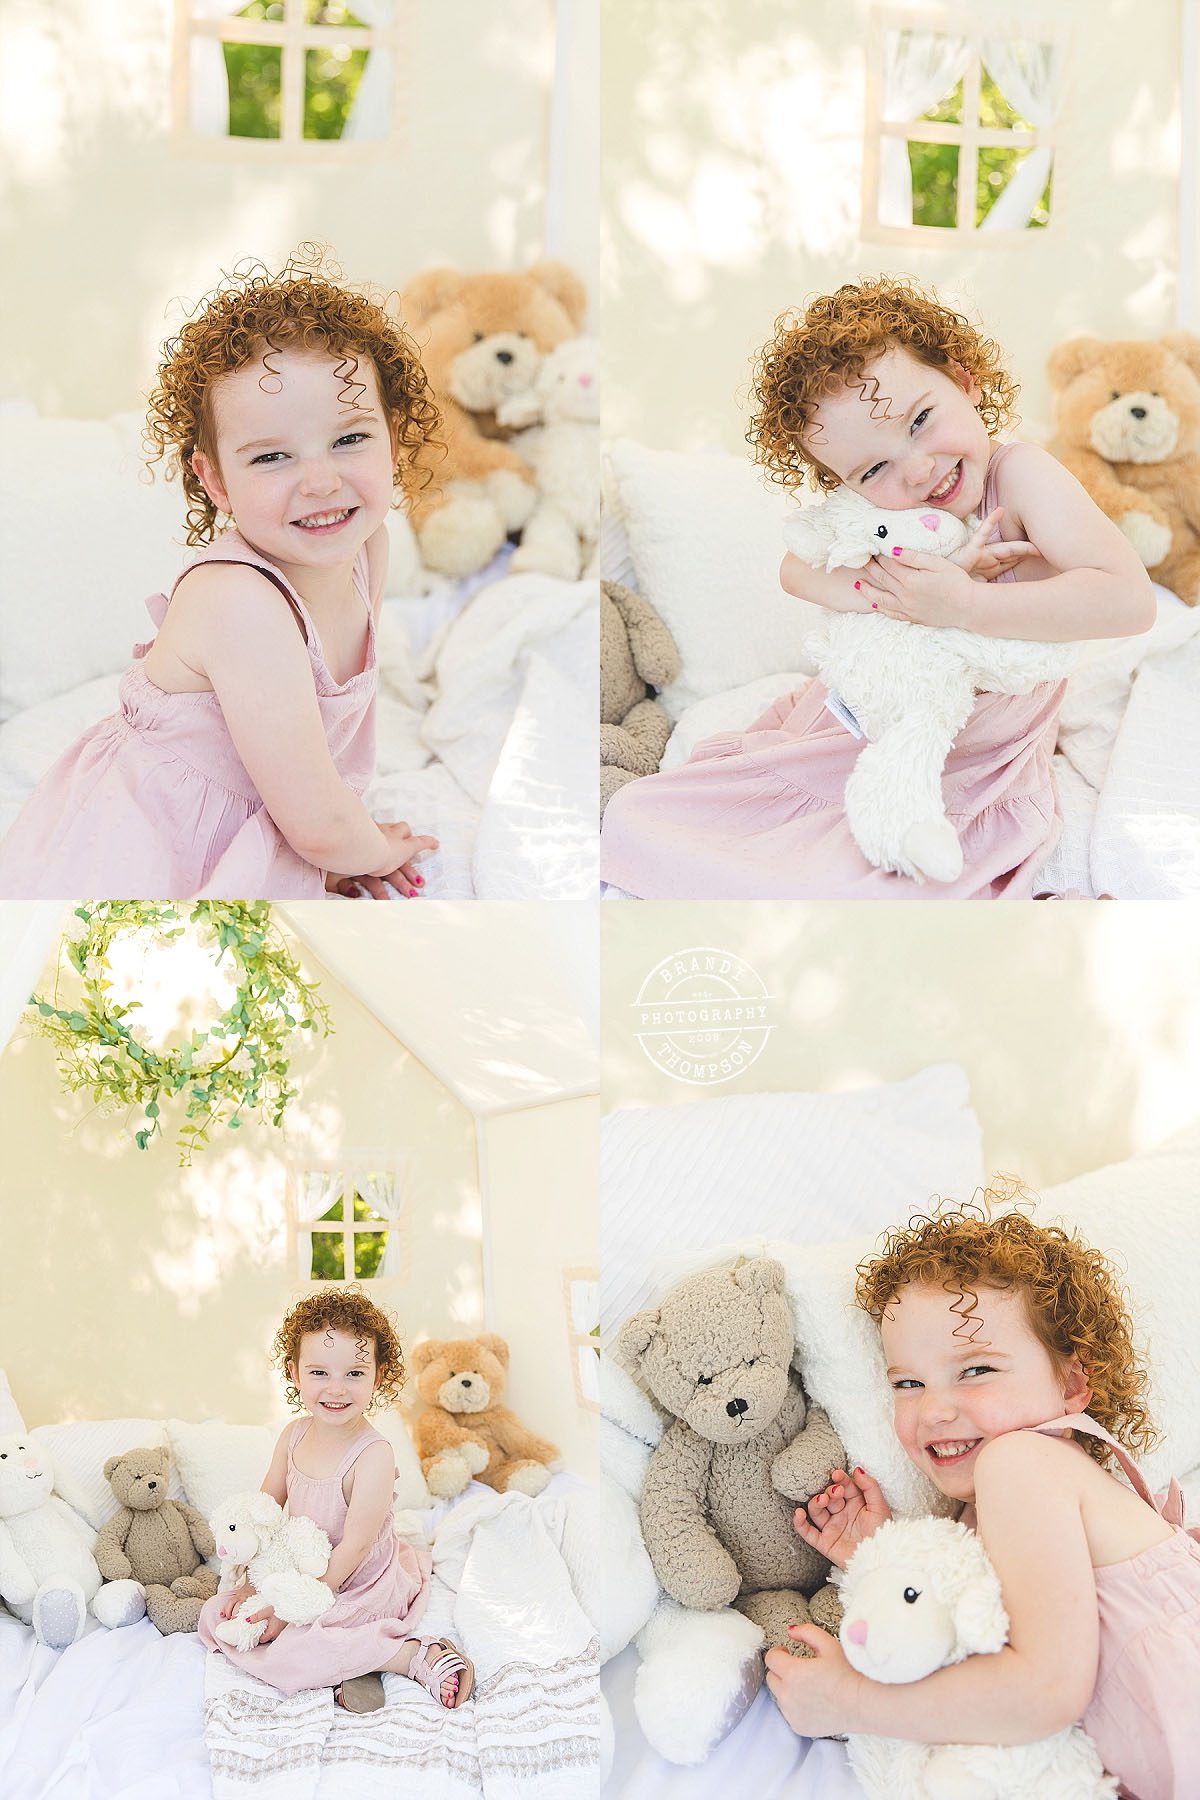 photo collage of preschool girl with light skin and curly red hair, in a cream colored tent with florals and stuffed animals